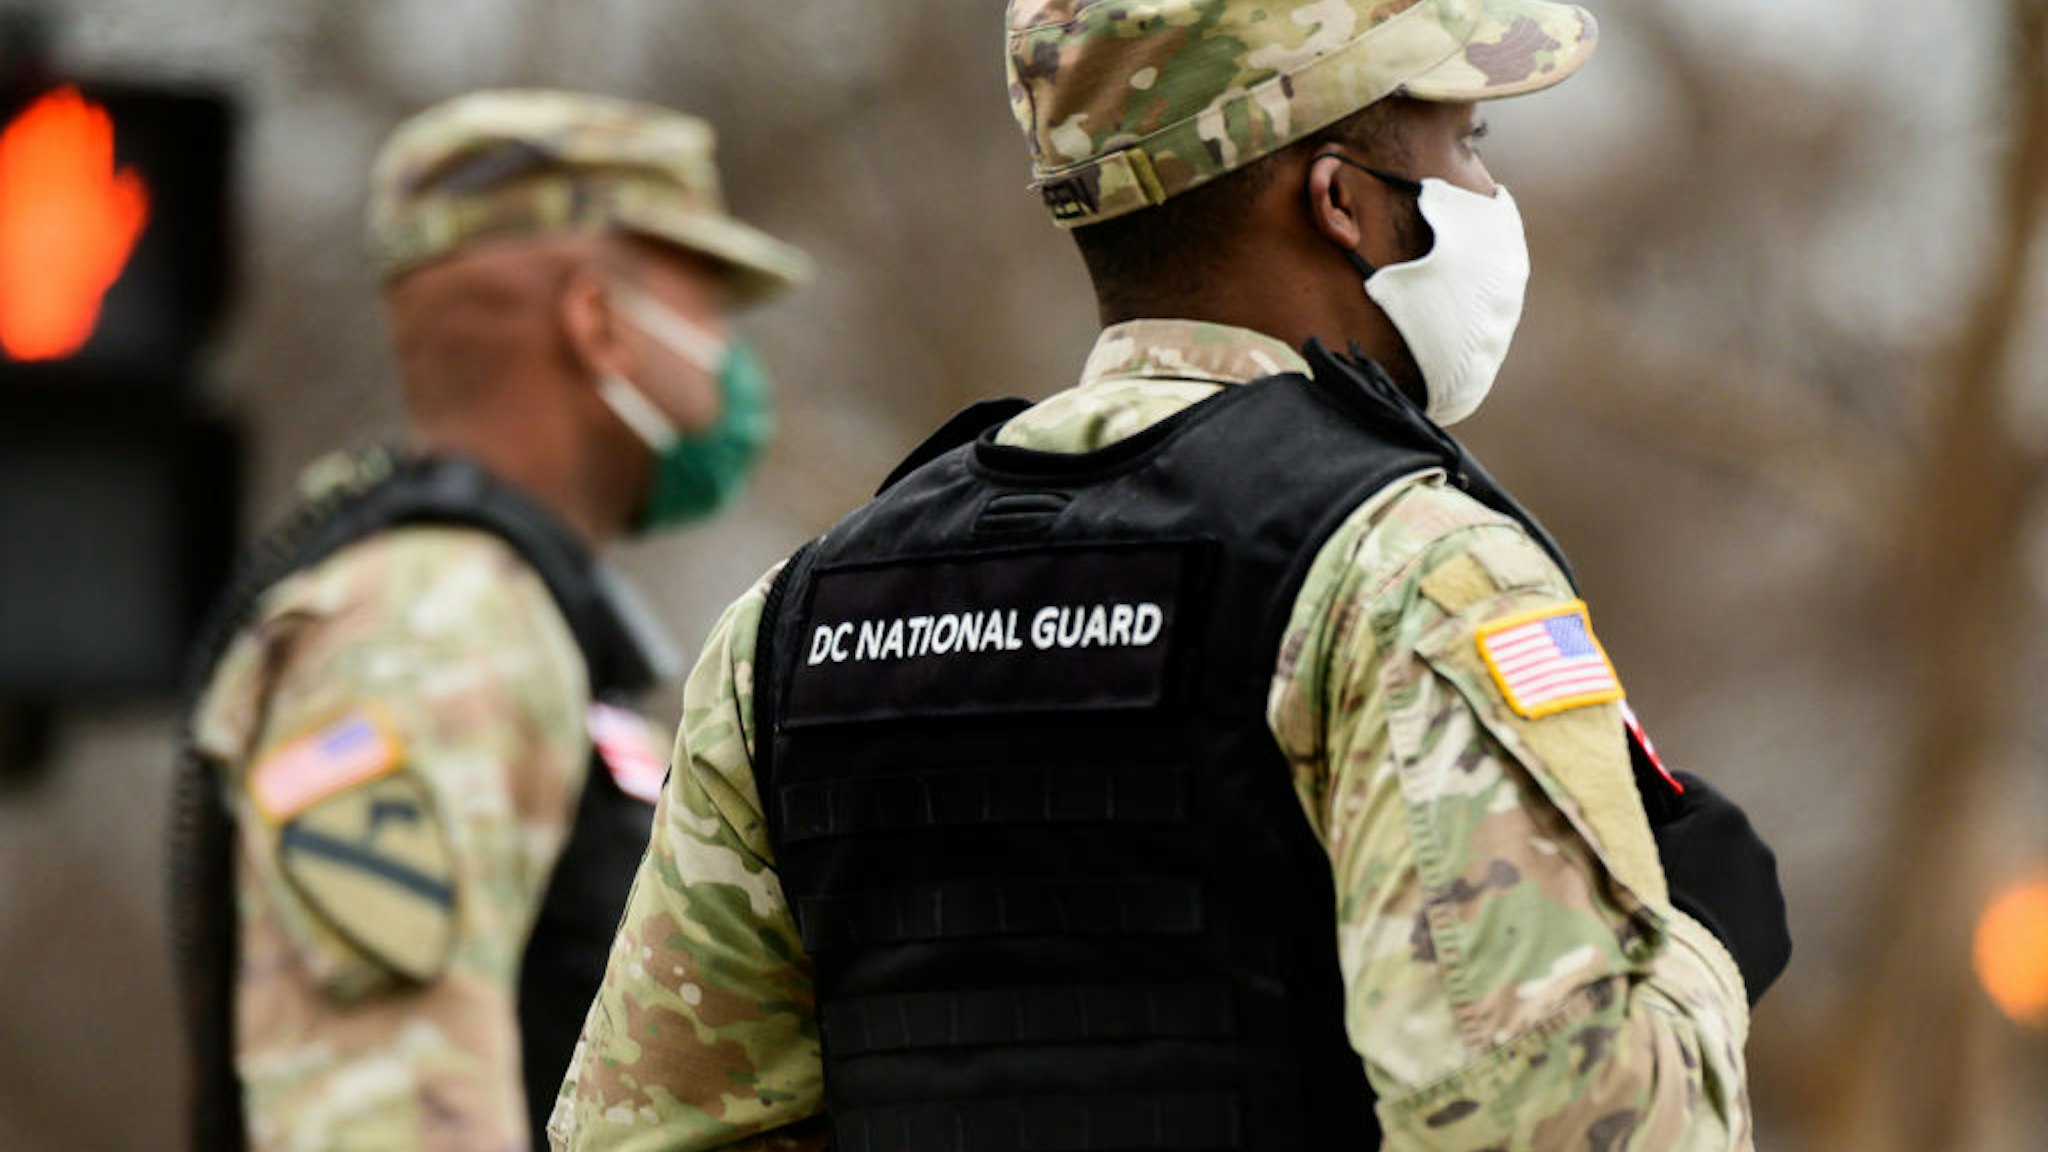 Members of the New York Army National Guards prepare to close a road near the White House in Washington, D.C., U.S., on Tuesday, Jan. 5, 2021. Washington's mayor, Muriel Bowser, urged residents not to engage with any protesters "seeking confrontation" and requested National Guard help in anticipation of potential violence in tied to protests as Congress meets to certify Joe Biden as the next U.S. president. Photographer: Erin Scott/Bloomberg via Getty Images